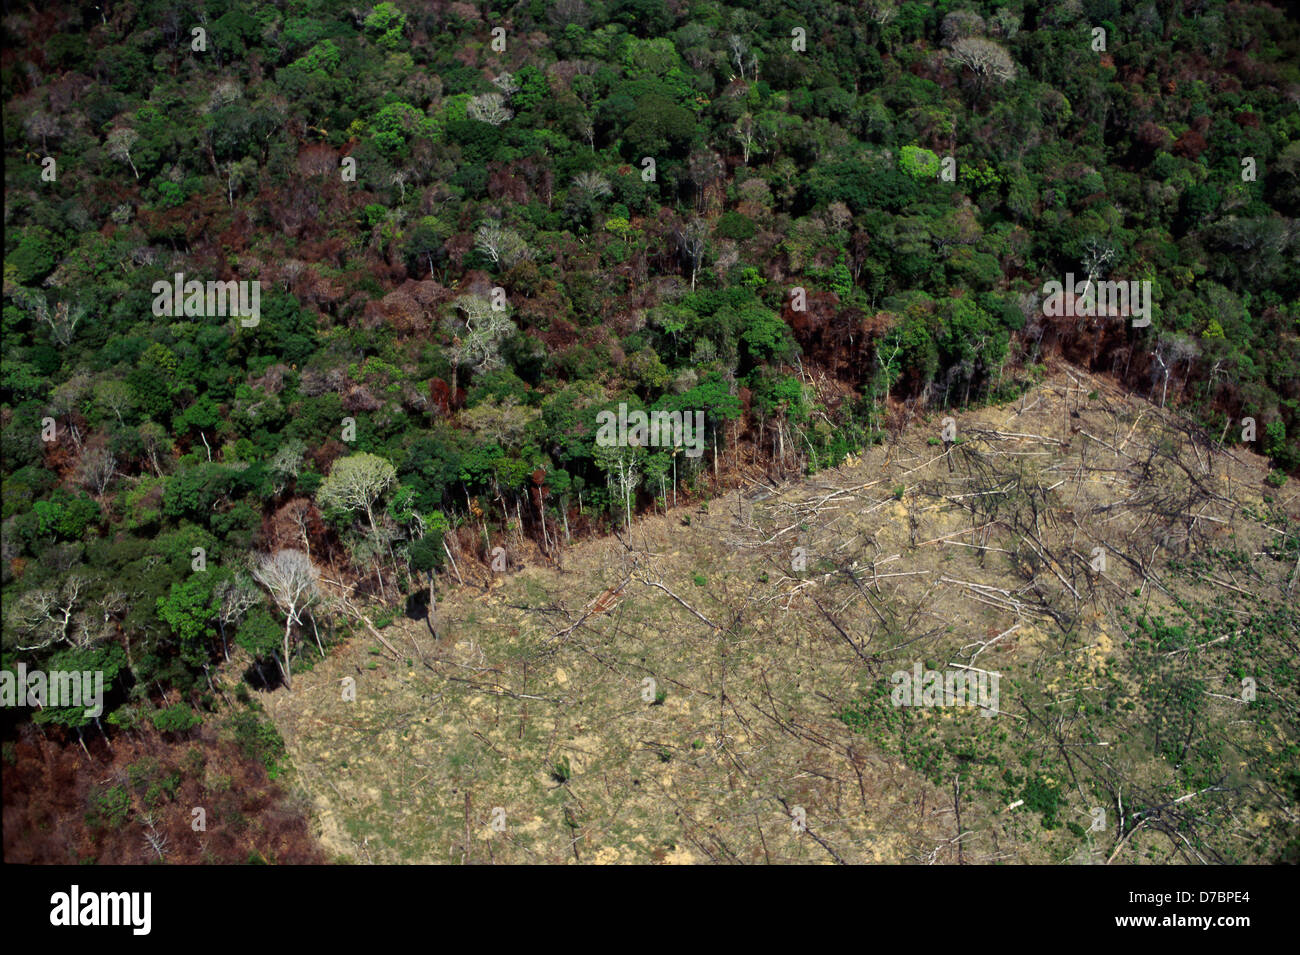 Aerial view forest clearance, deforestation. Amazon rain forest, Brazil. Stock Photo